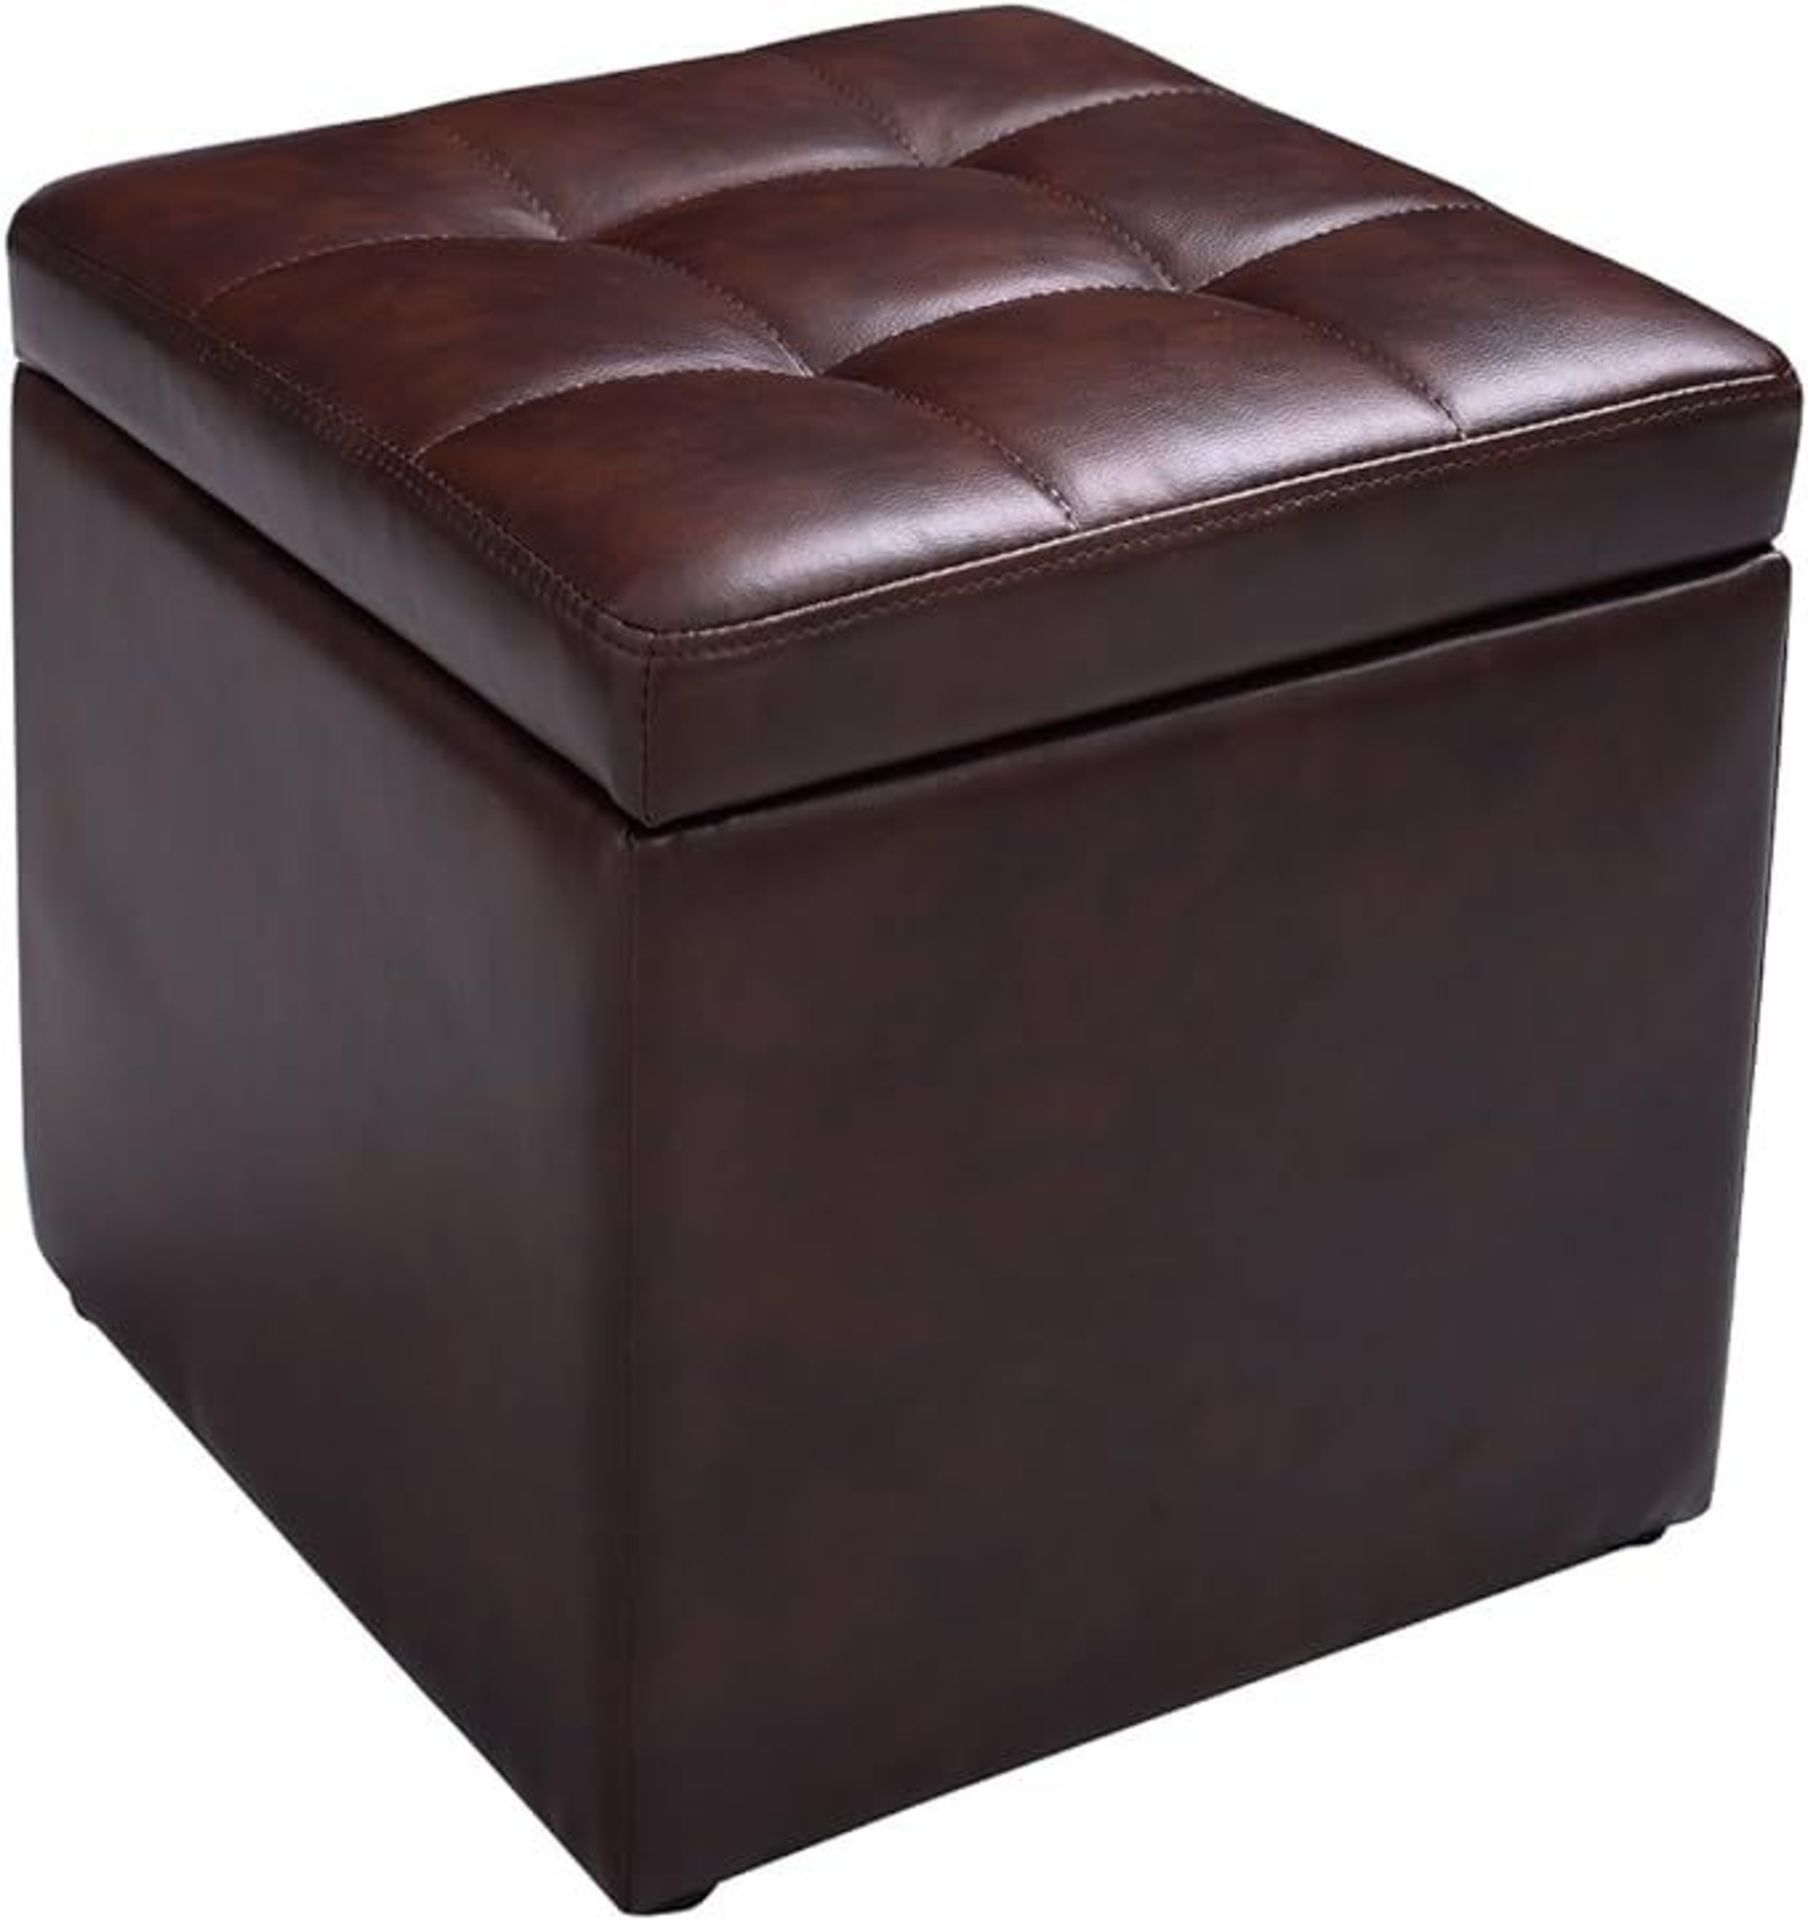 COSTWAY Faux Leather Ottoman, Pouffe Storage Toy Box with Hinge Top | Padded Foot Stool, Cube